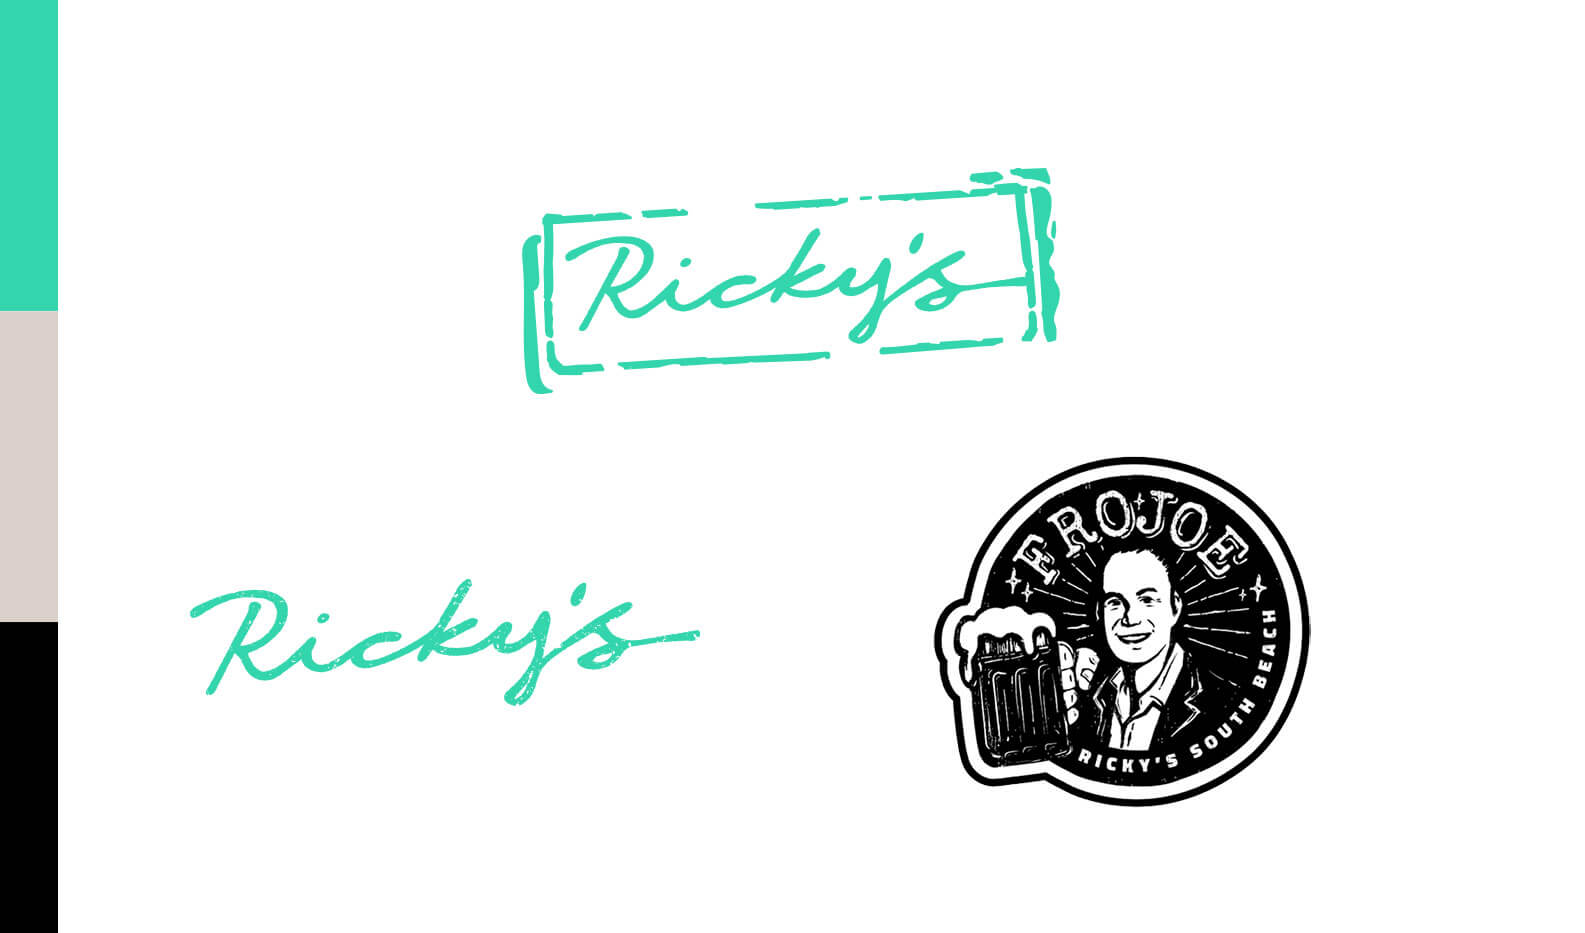 Ricky's logo and branding by Jacober Creative